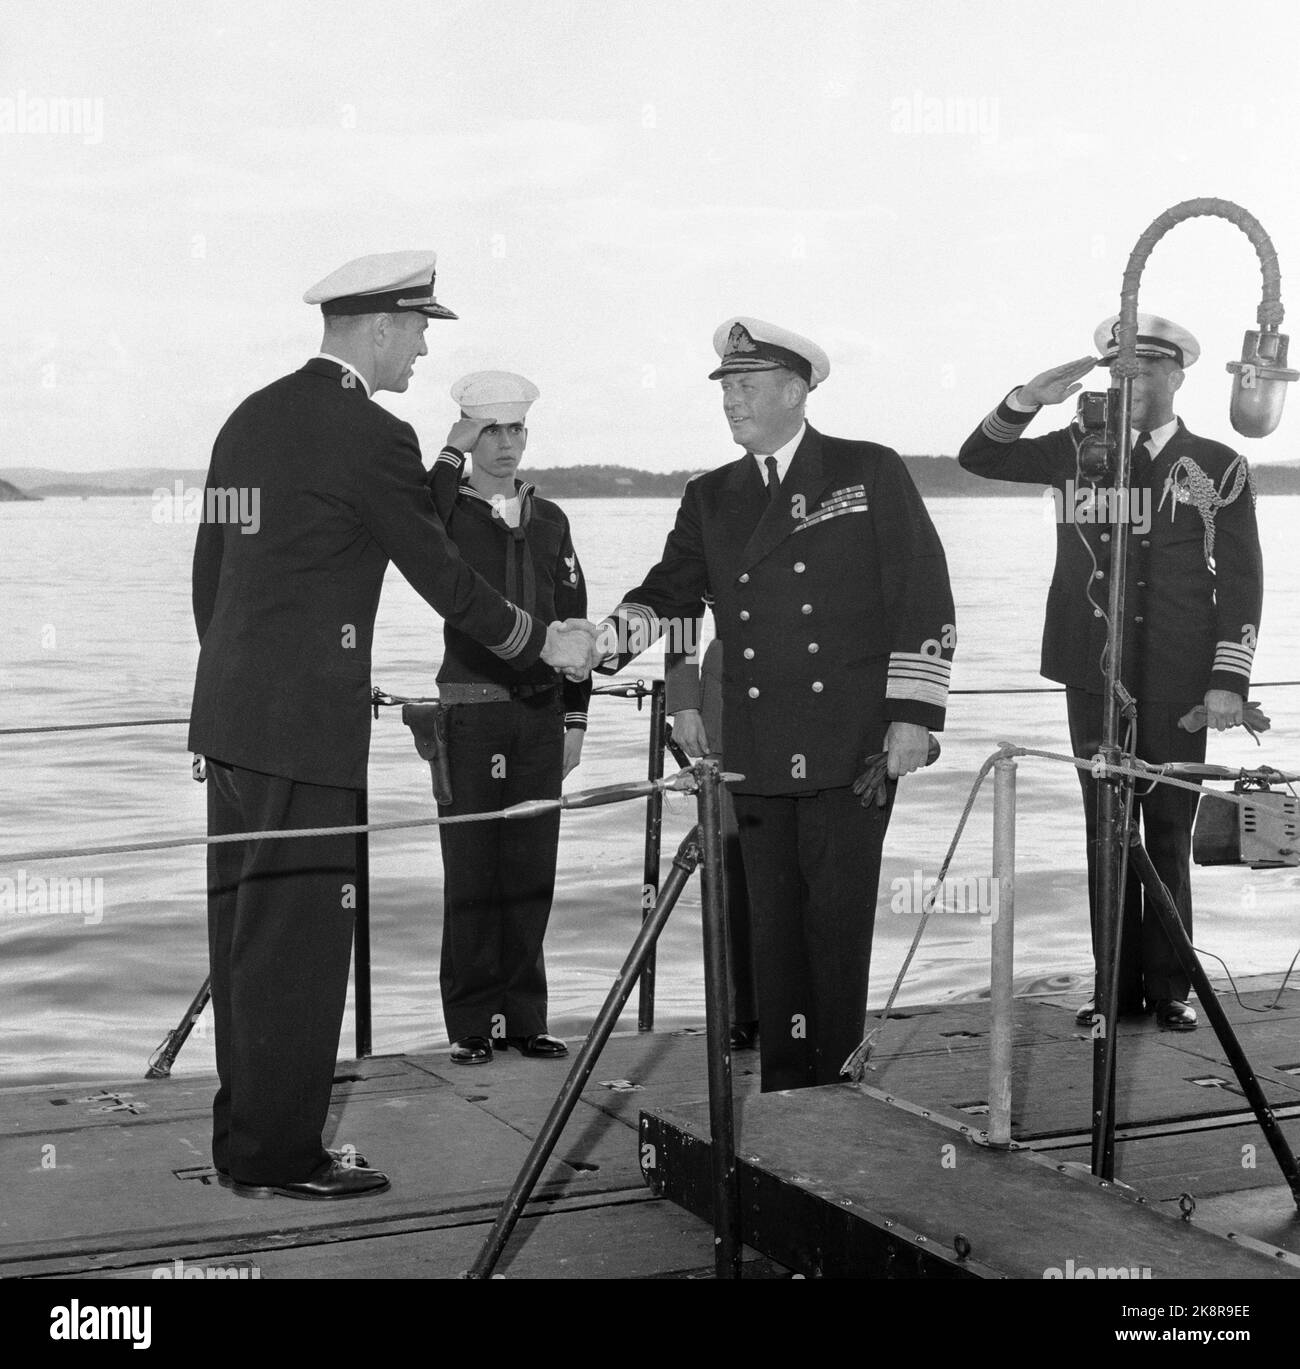 Bergen/Oslo 19580824 King Olav boards the 'skate' nuclear submarine and welcomed by the commander of the ship, Commander Calvert, a submarine veteran of 38 years. Photo: Sverre A. Børretzen / Current / NTB Stock Photo